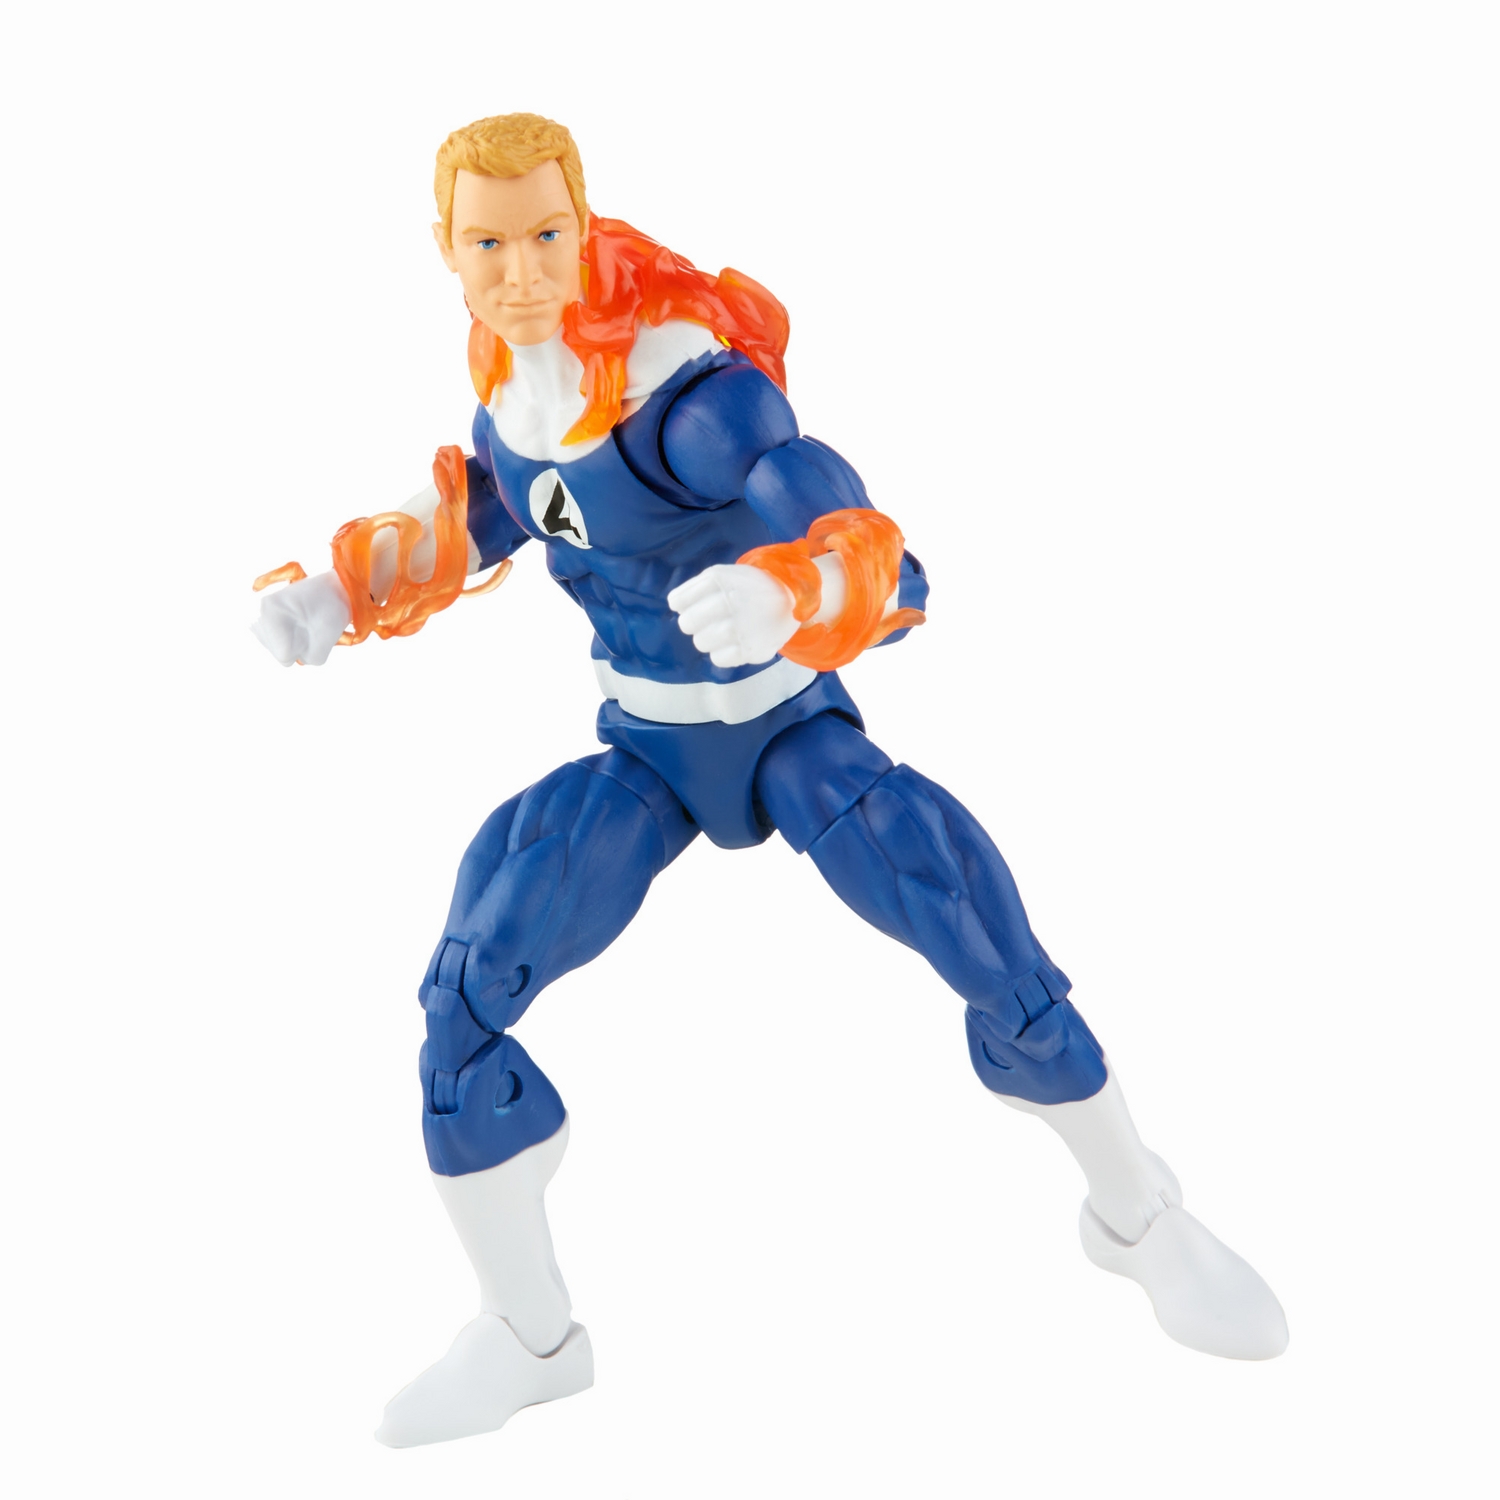 MARVEL LEGENDS SERIES 6-INCH RETRO FANTASTIC FOUR THE HUMAN TORCH Figure (Powered Down)_oop 4.jpg